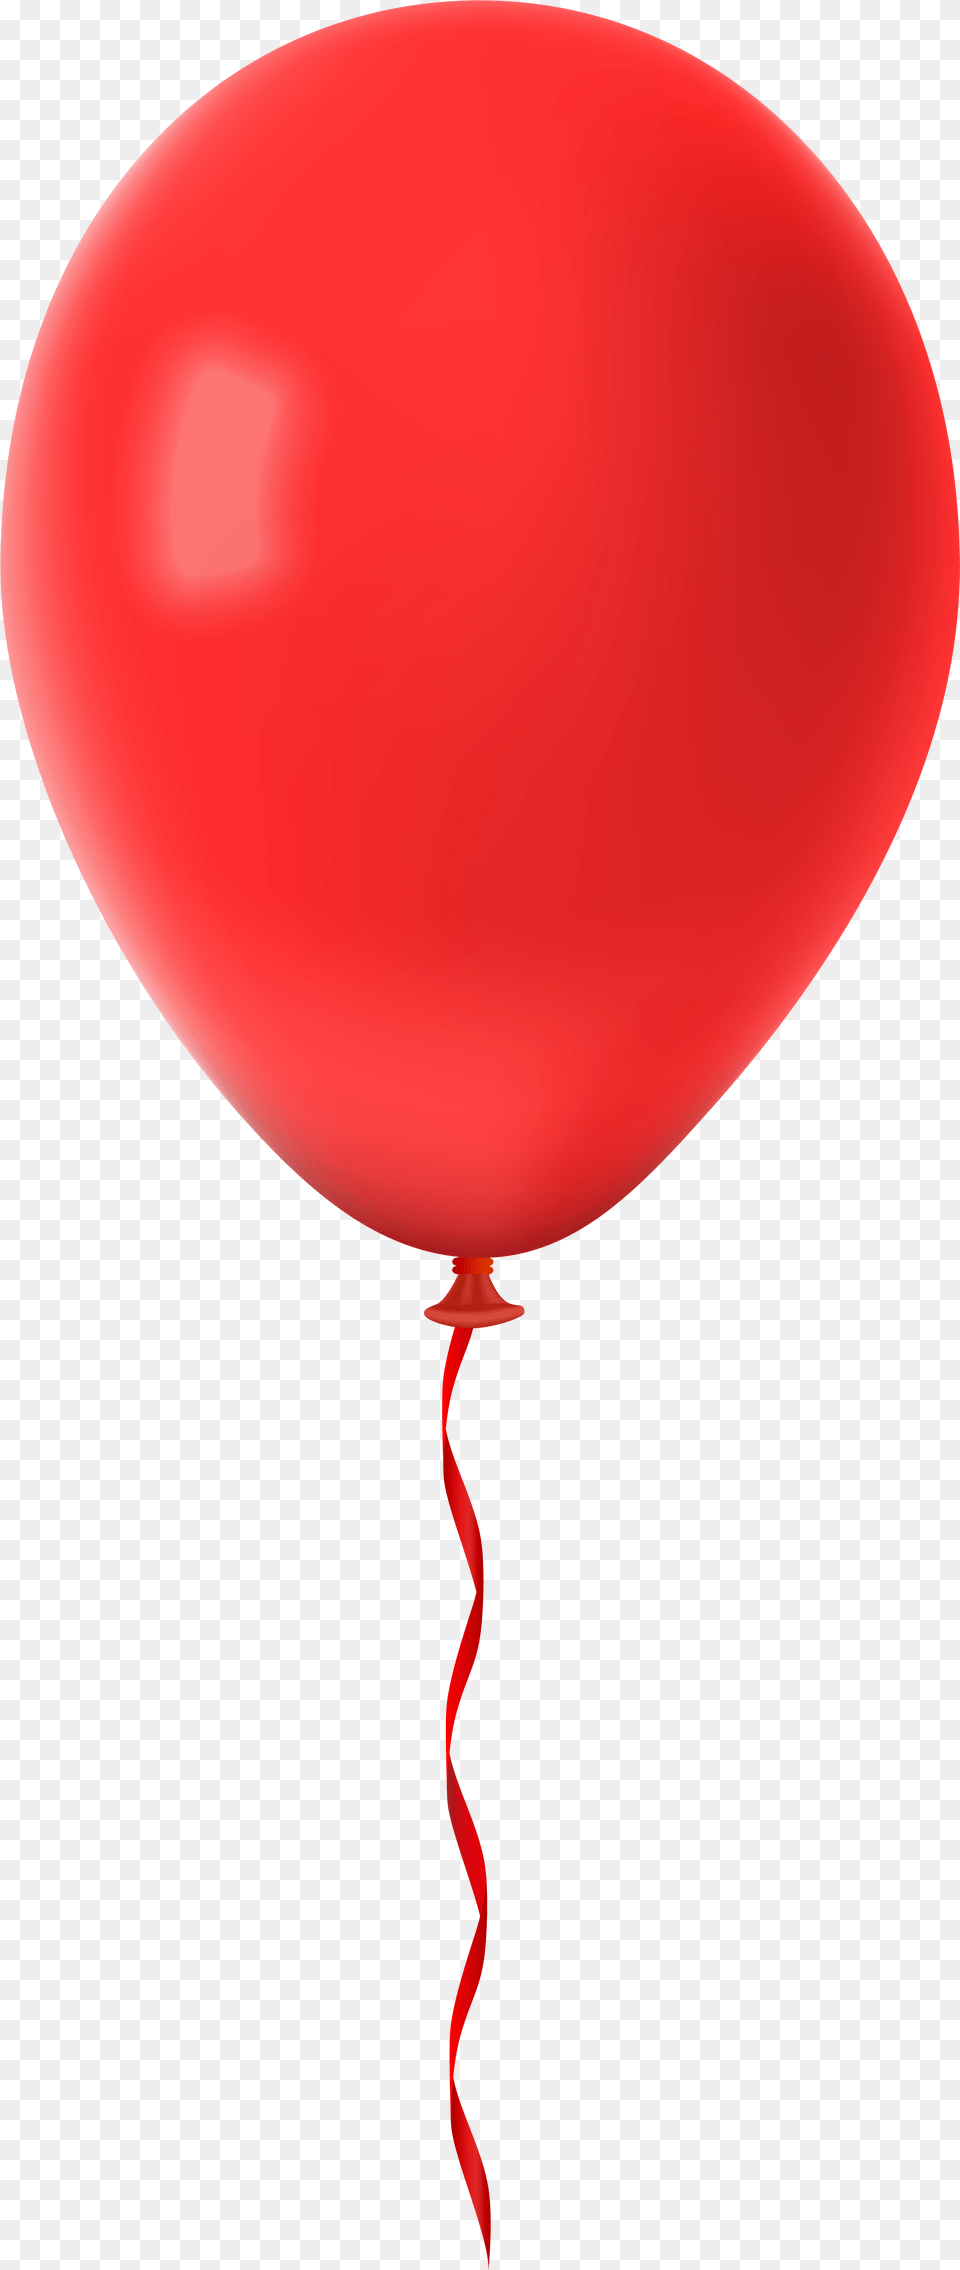 Red Balloons Red Balloon Transparent Background Png